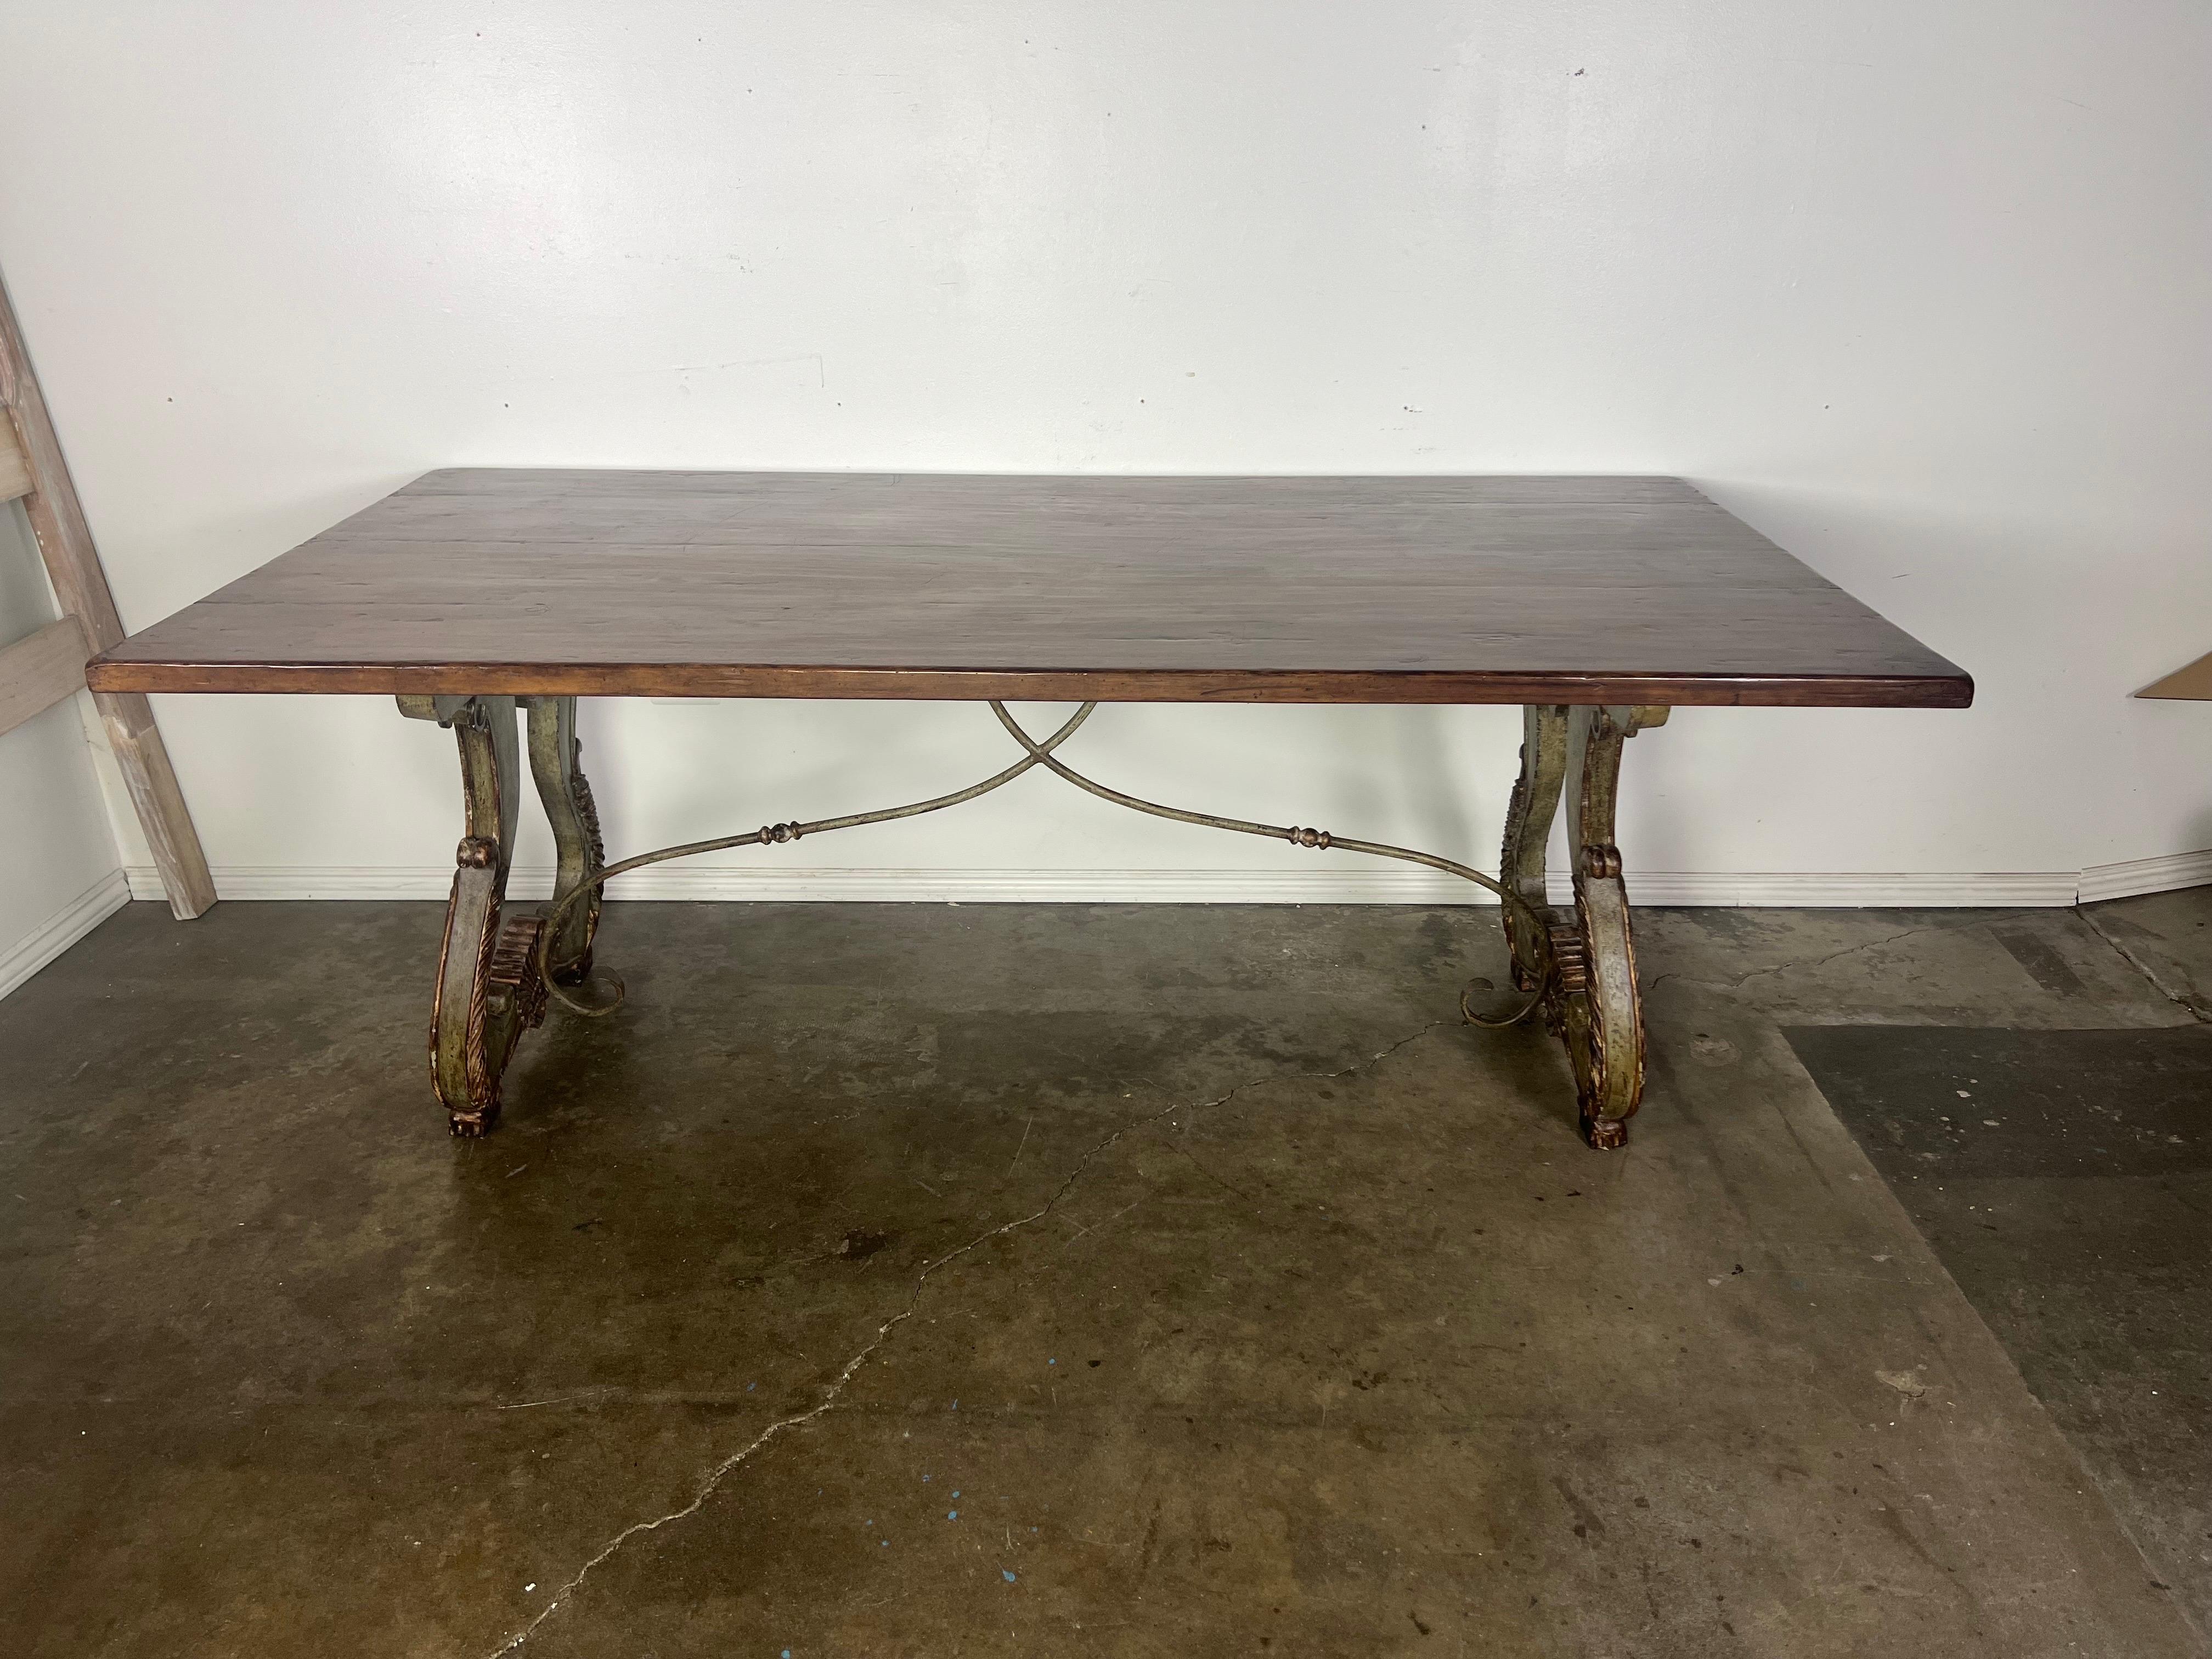 Italian country Trestle dining table with a painted & parcel gilt base depicting a pair of lyre shaped pedestals and featuring a solid wood top and an iron stretcher.  This table design combines rustic charm with unique elements, creating a warm and